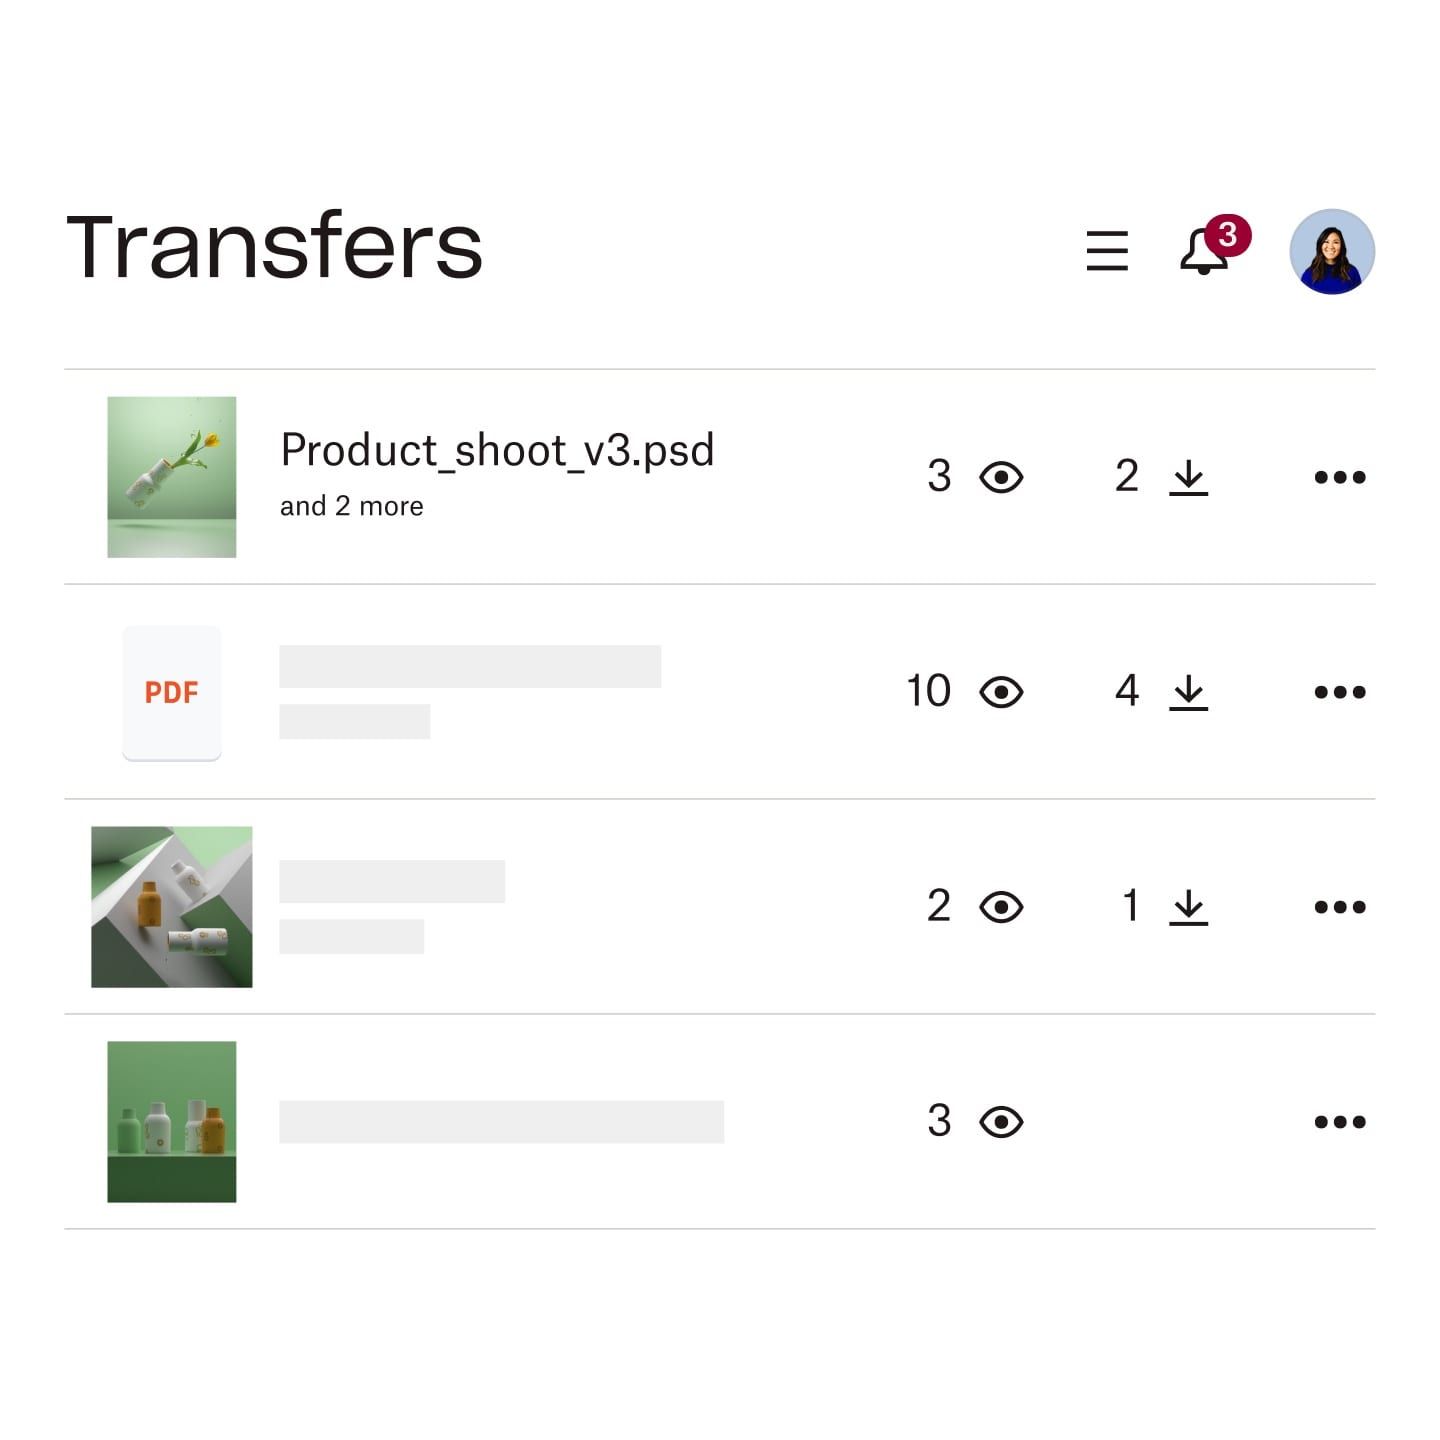 Screenshot of viewership stats and settings for files in Dropbox Transfer